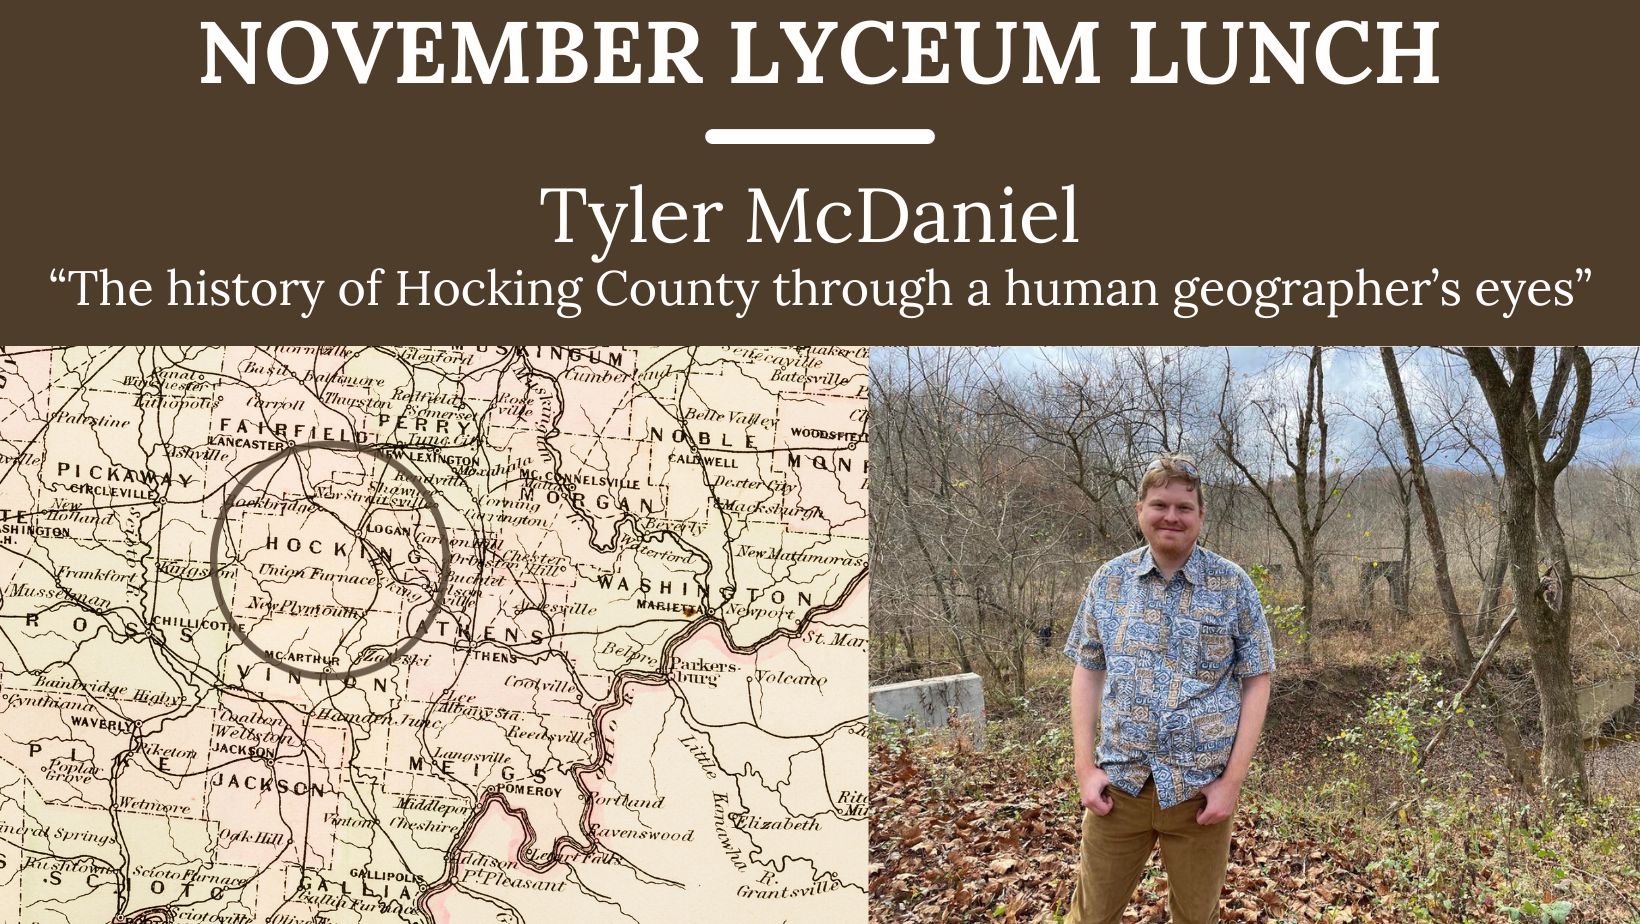 A flyer for the November Lyceum Lunch event.